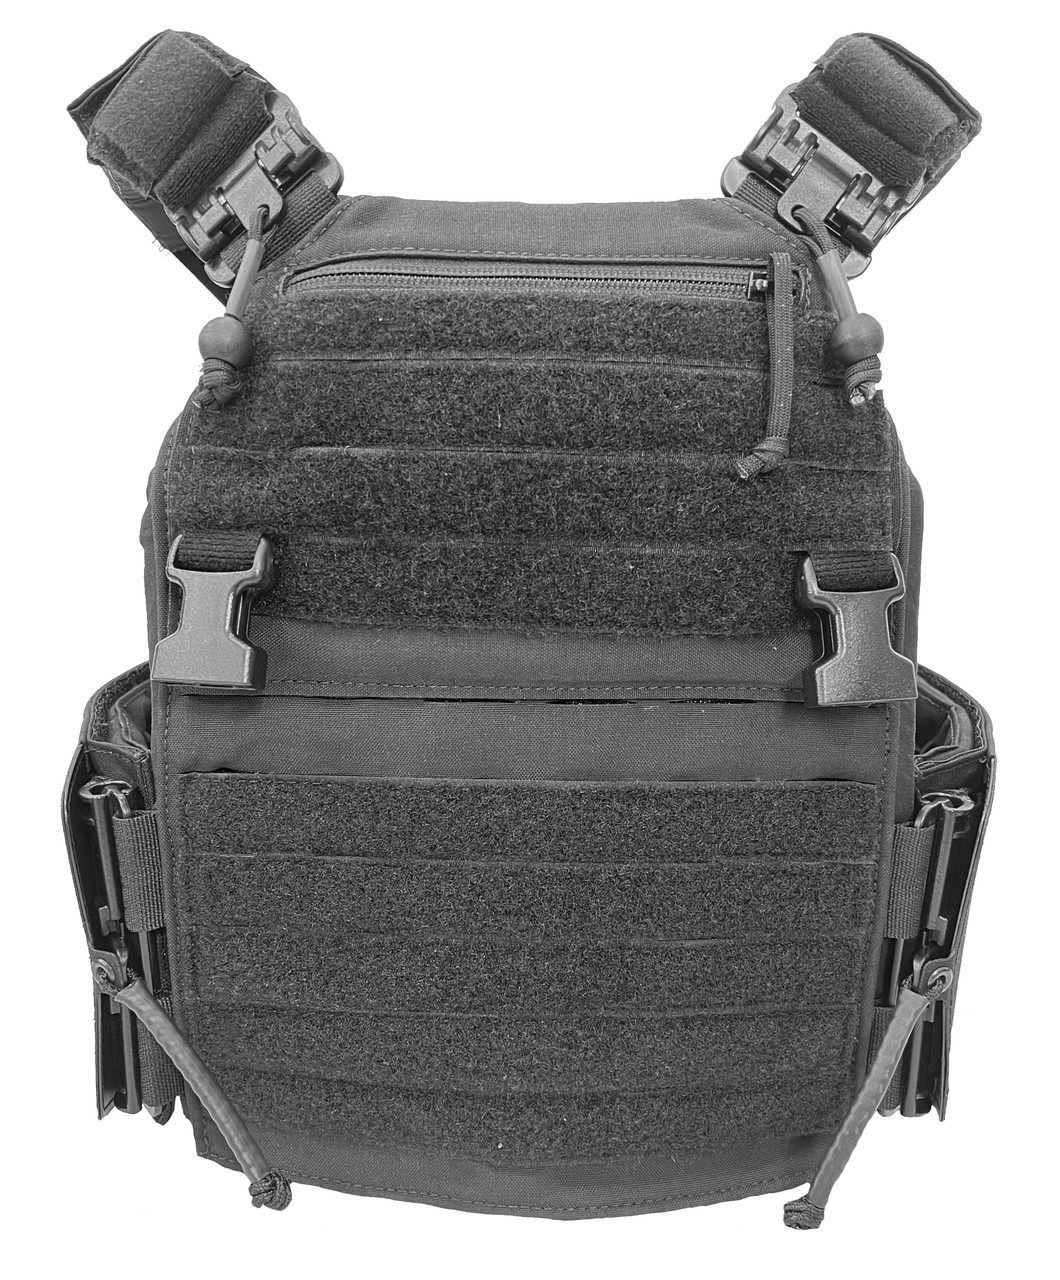 Spiritus Systems LV119 Plate Carriers and Parts